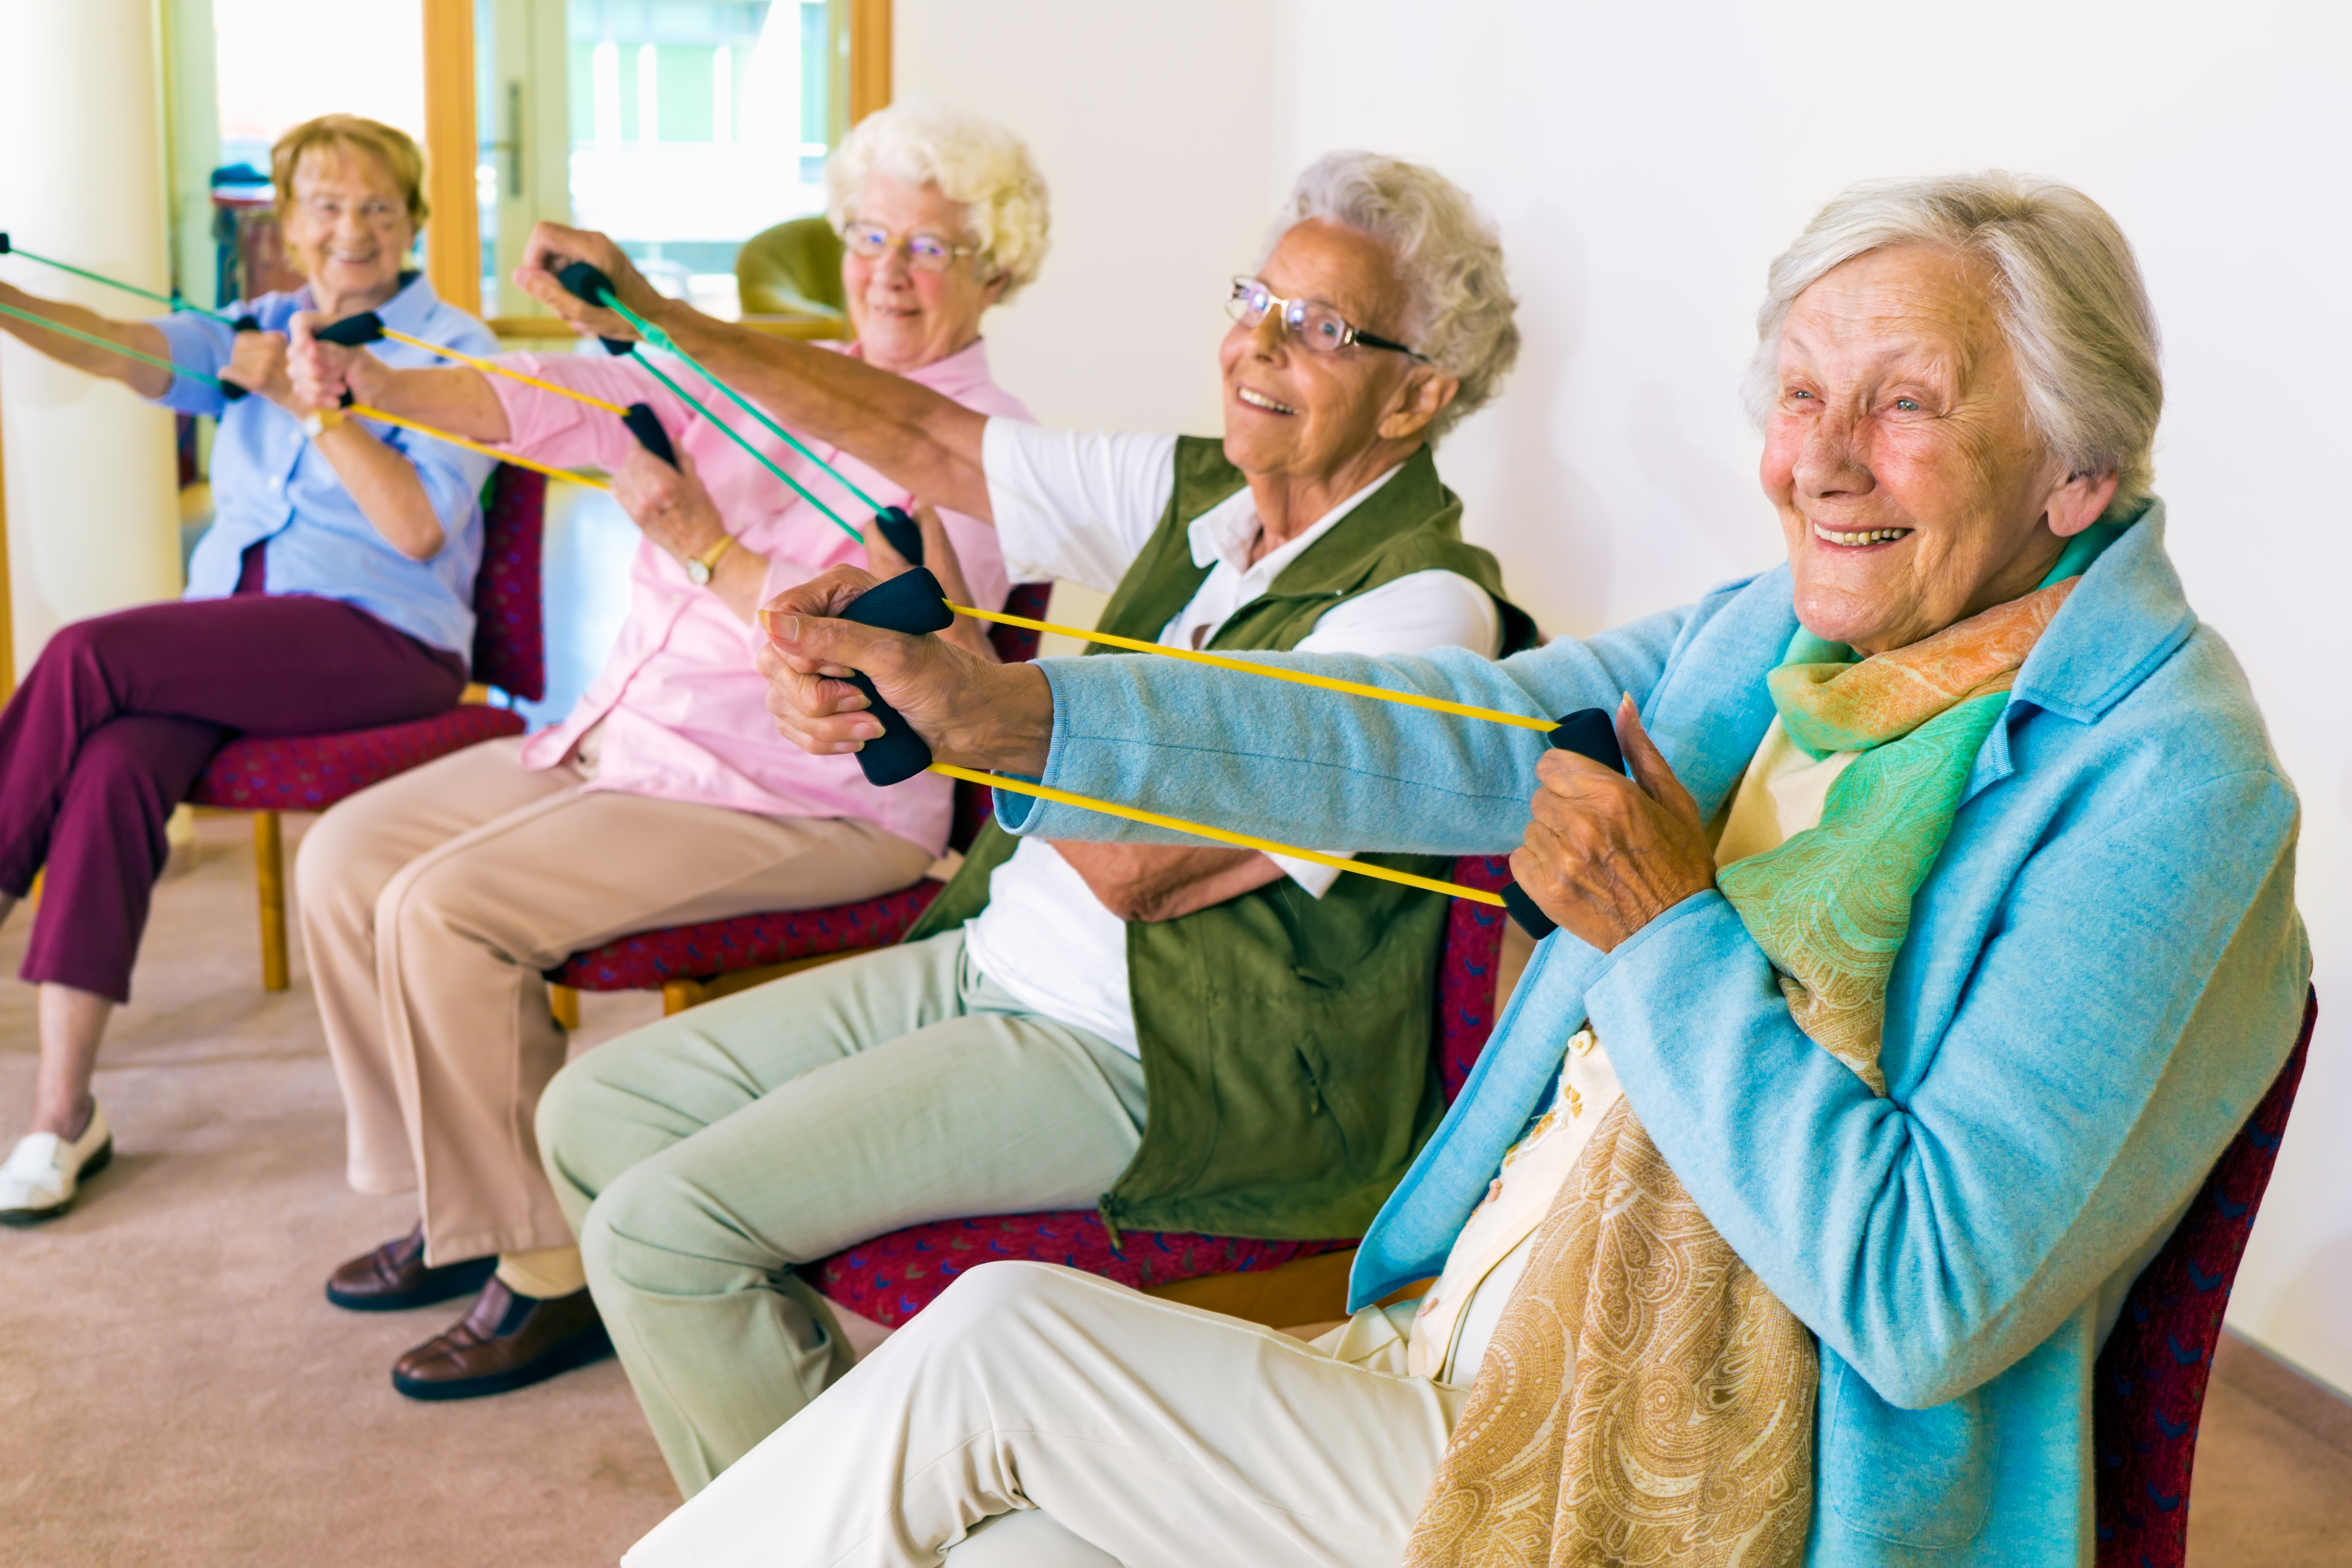 Social activities among the residents, such as coffee mornings, film nights or a gardening club. Image